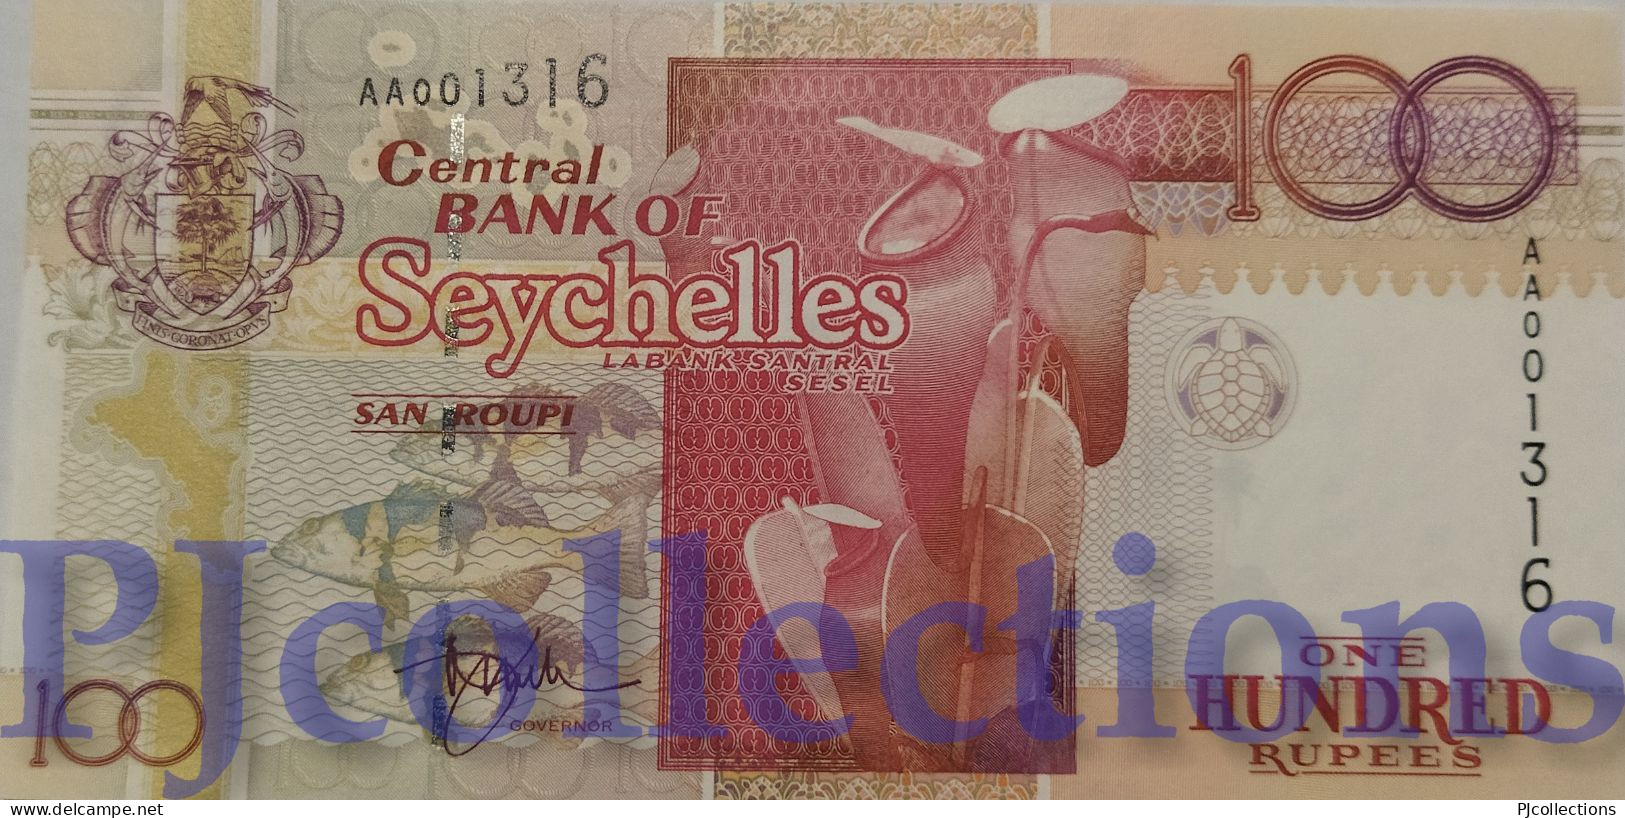 SEYCHELLES 100 RUPEES 1998 PICK 39 UNC LOW SERIAL NUMBER "AA001316" - Seychelles